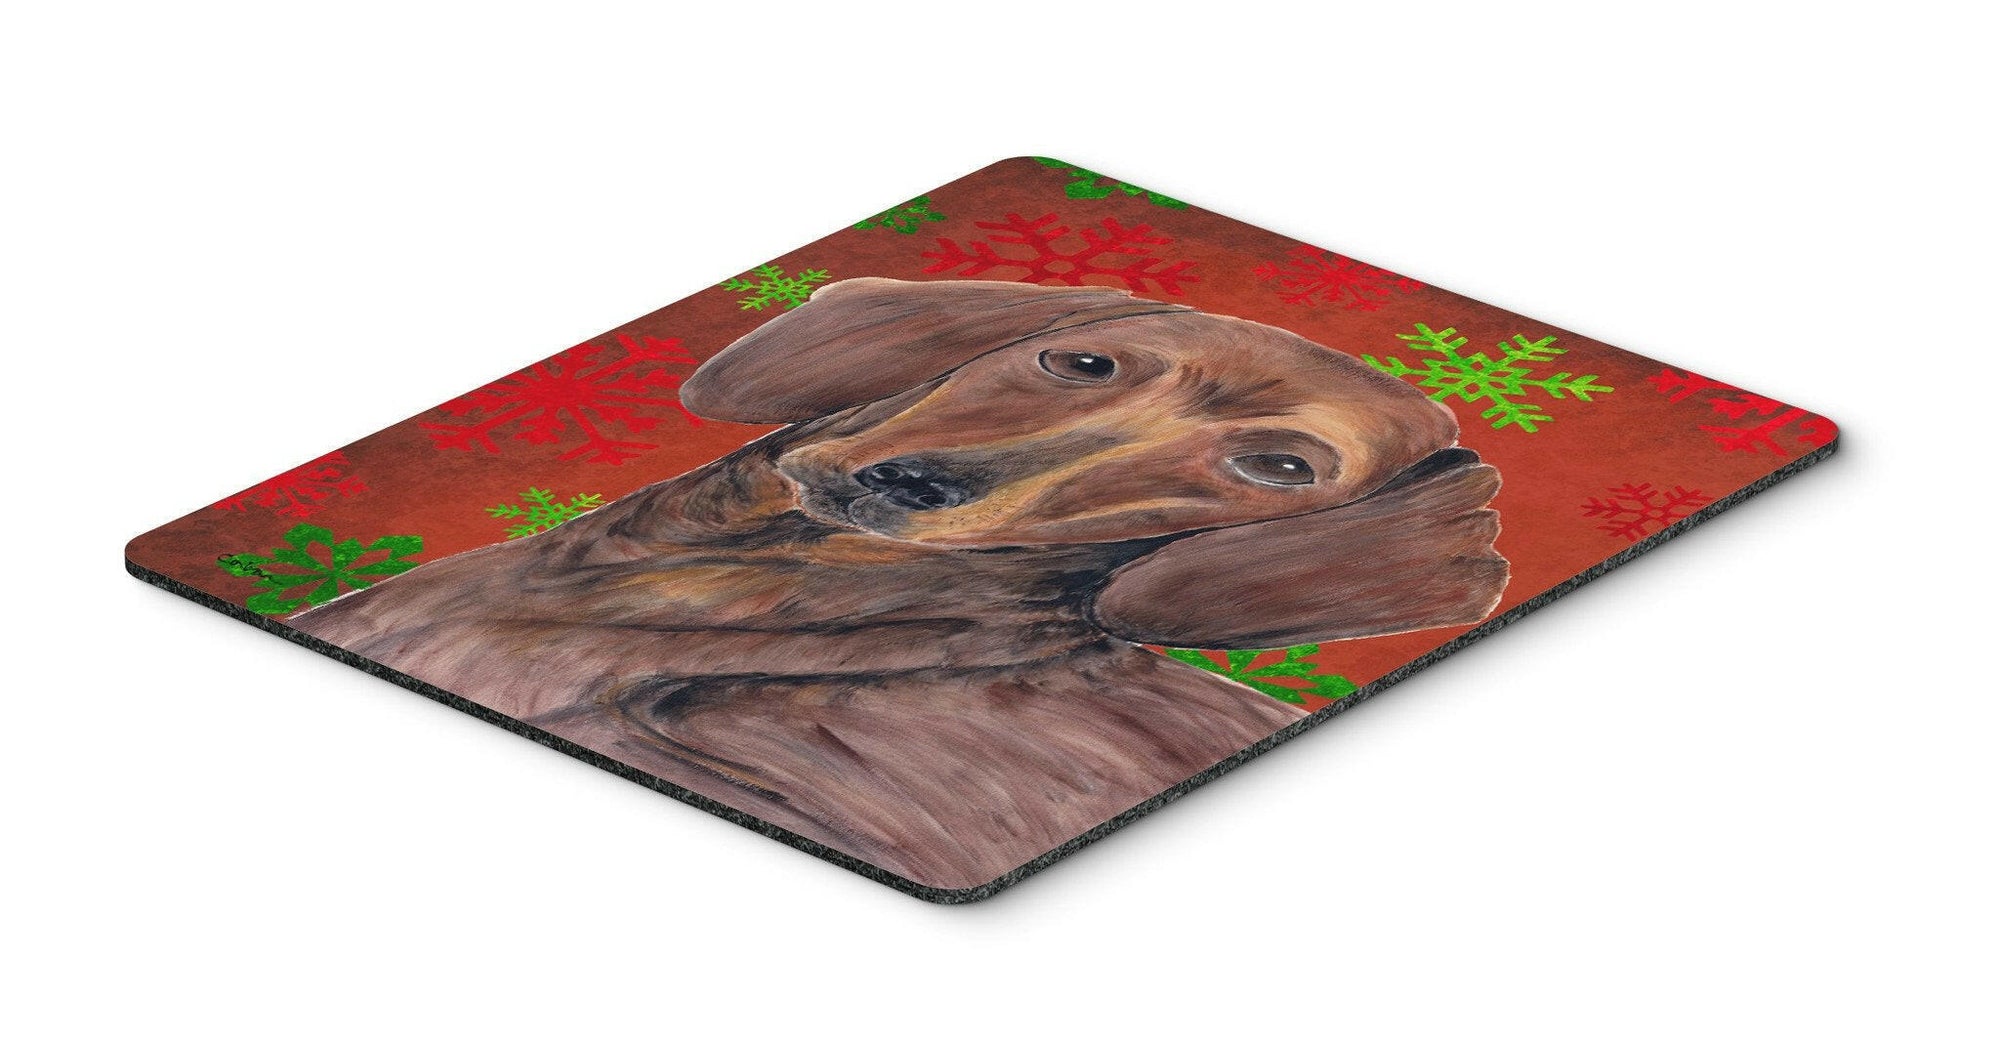 Dachshund Red and Green Snowflakes Christmas Mouse Pad, Hot Pad or Trivet by Caroline's Treasures